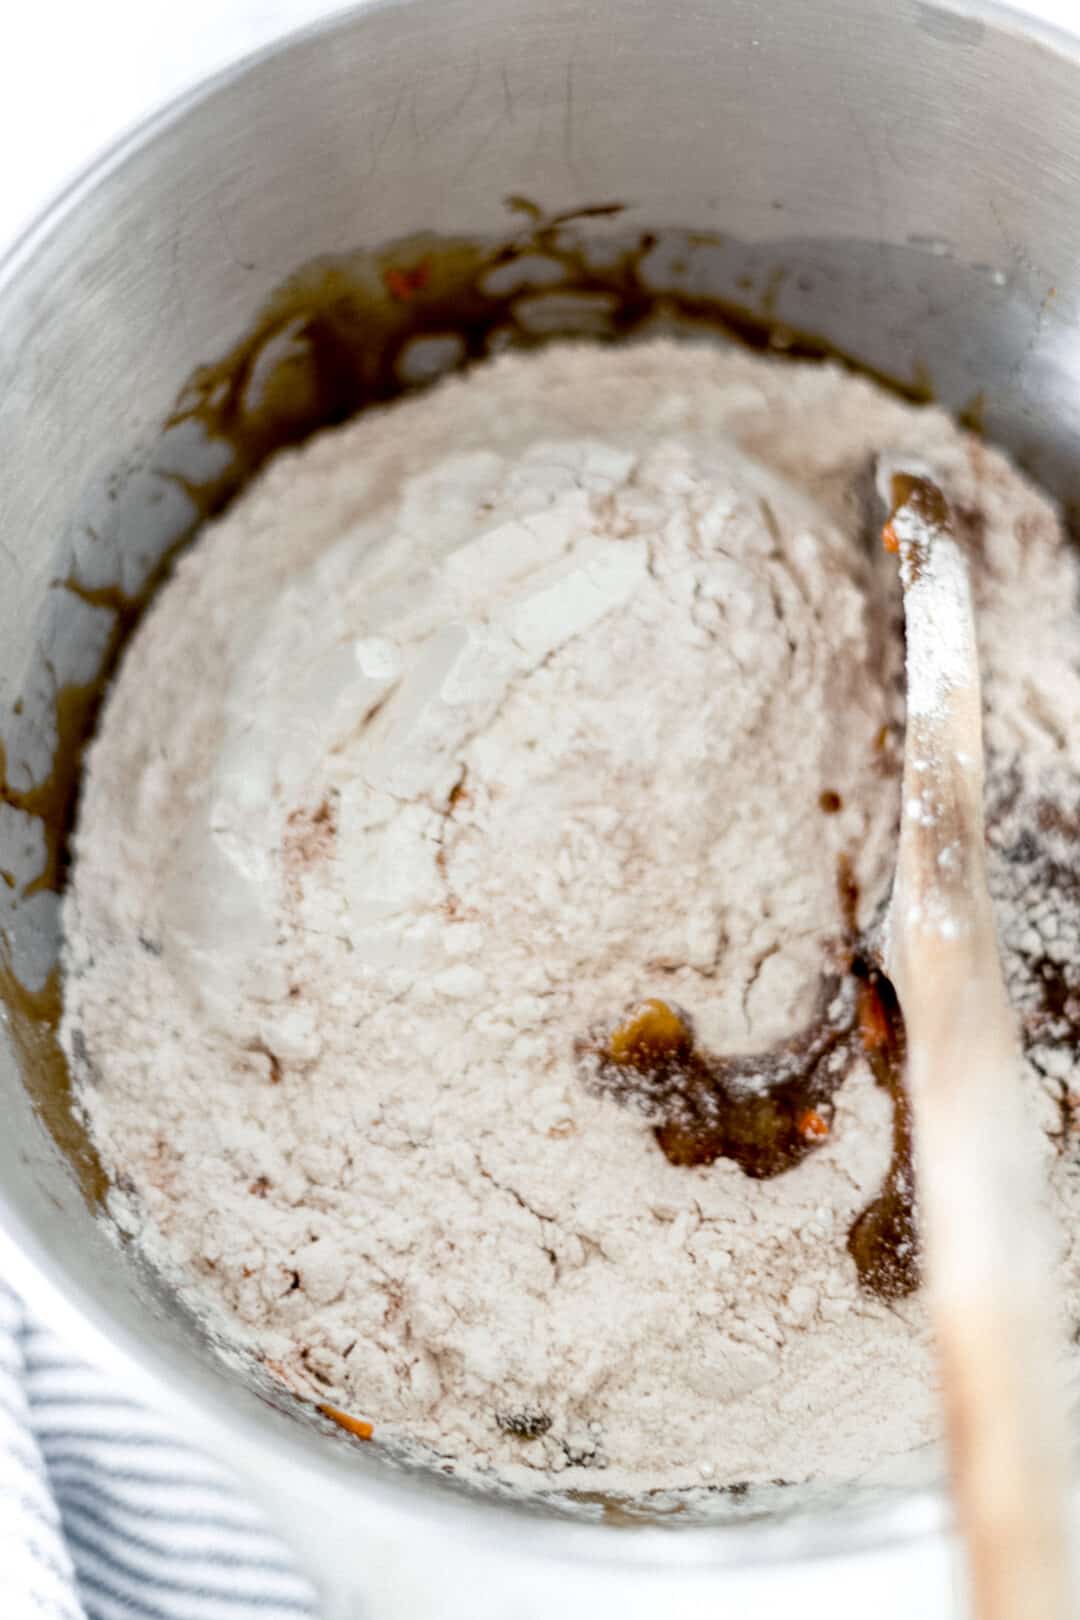 dry mixture added to carrot raisin bread batter with wooden spoon